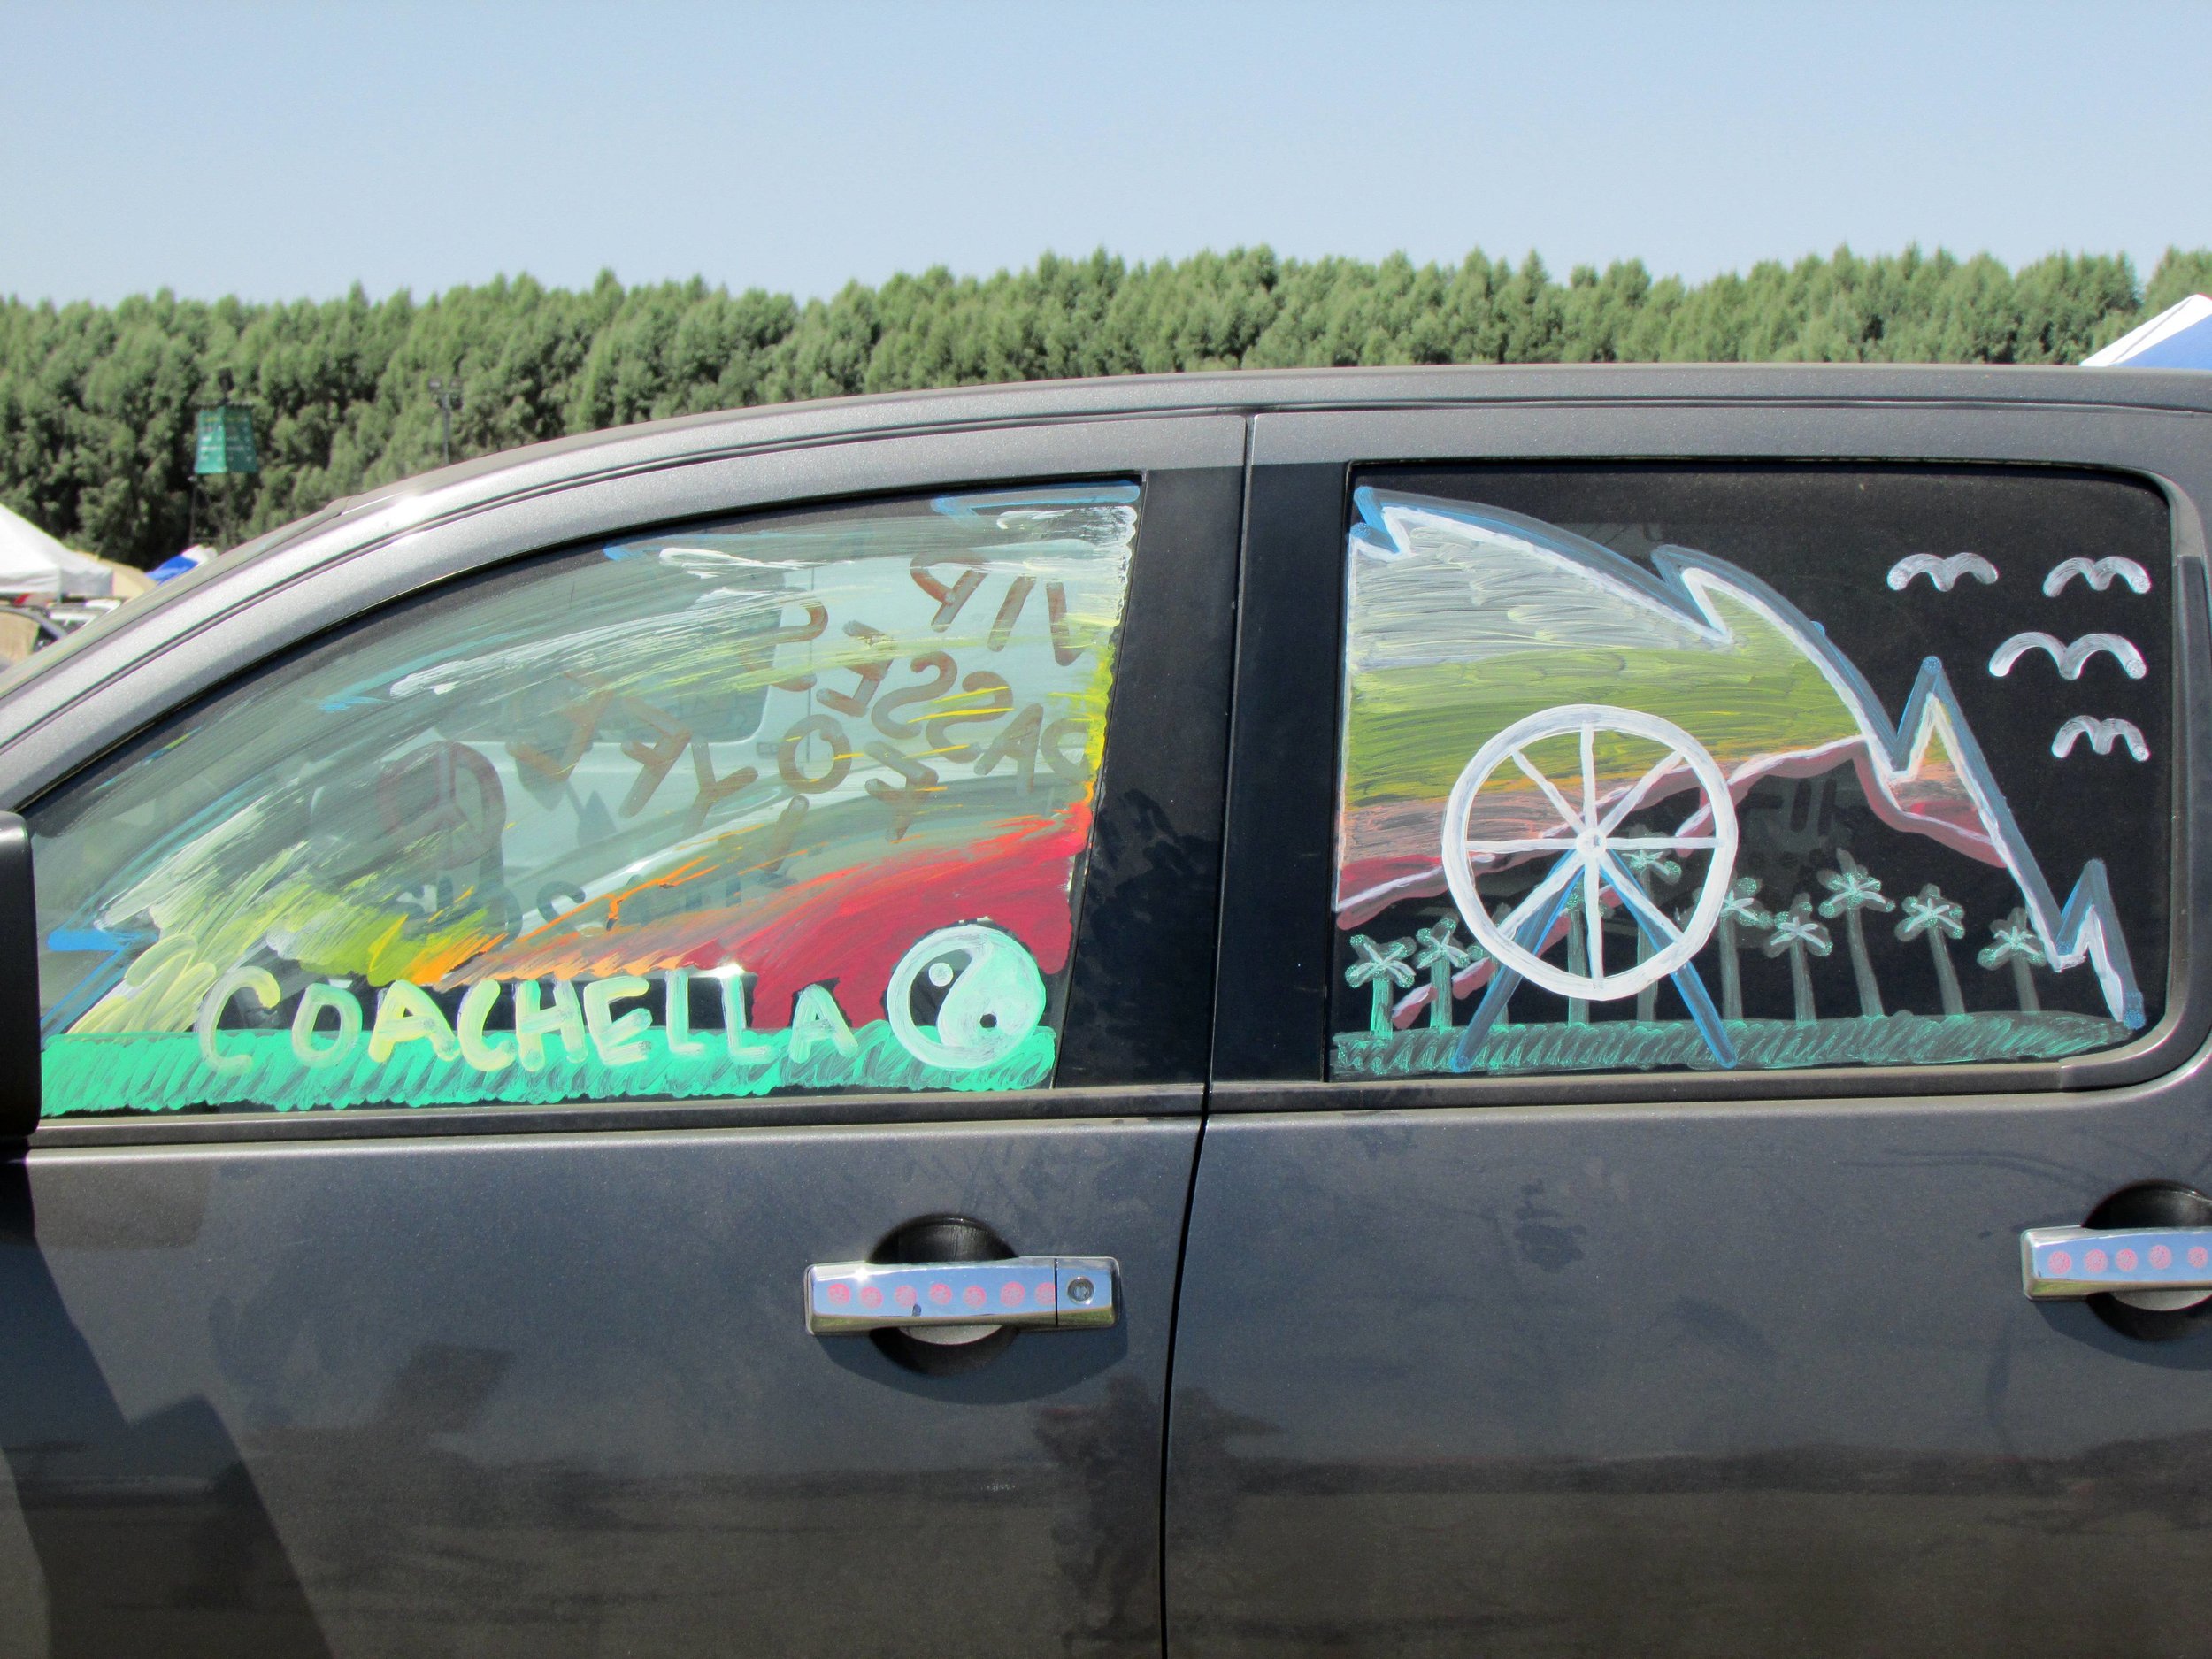 5 - Spotted some entries to Carpoolchella, Coachella's sustainability initiative & ticket lottery.JPG